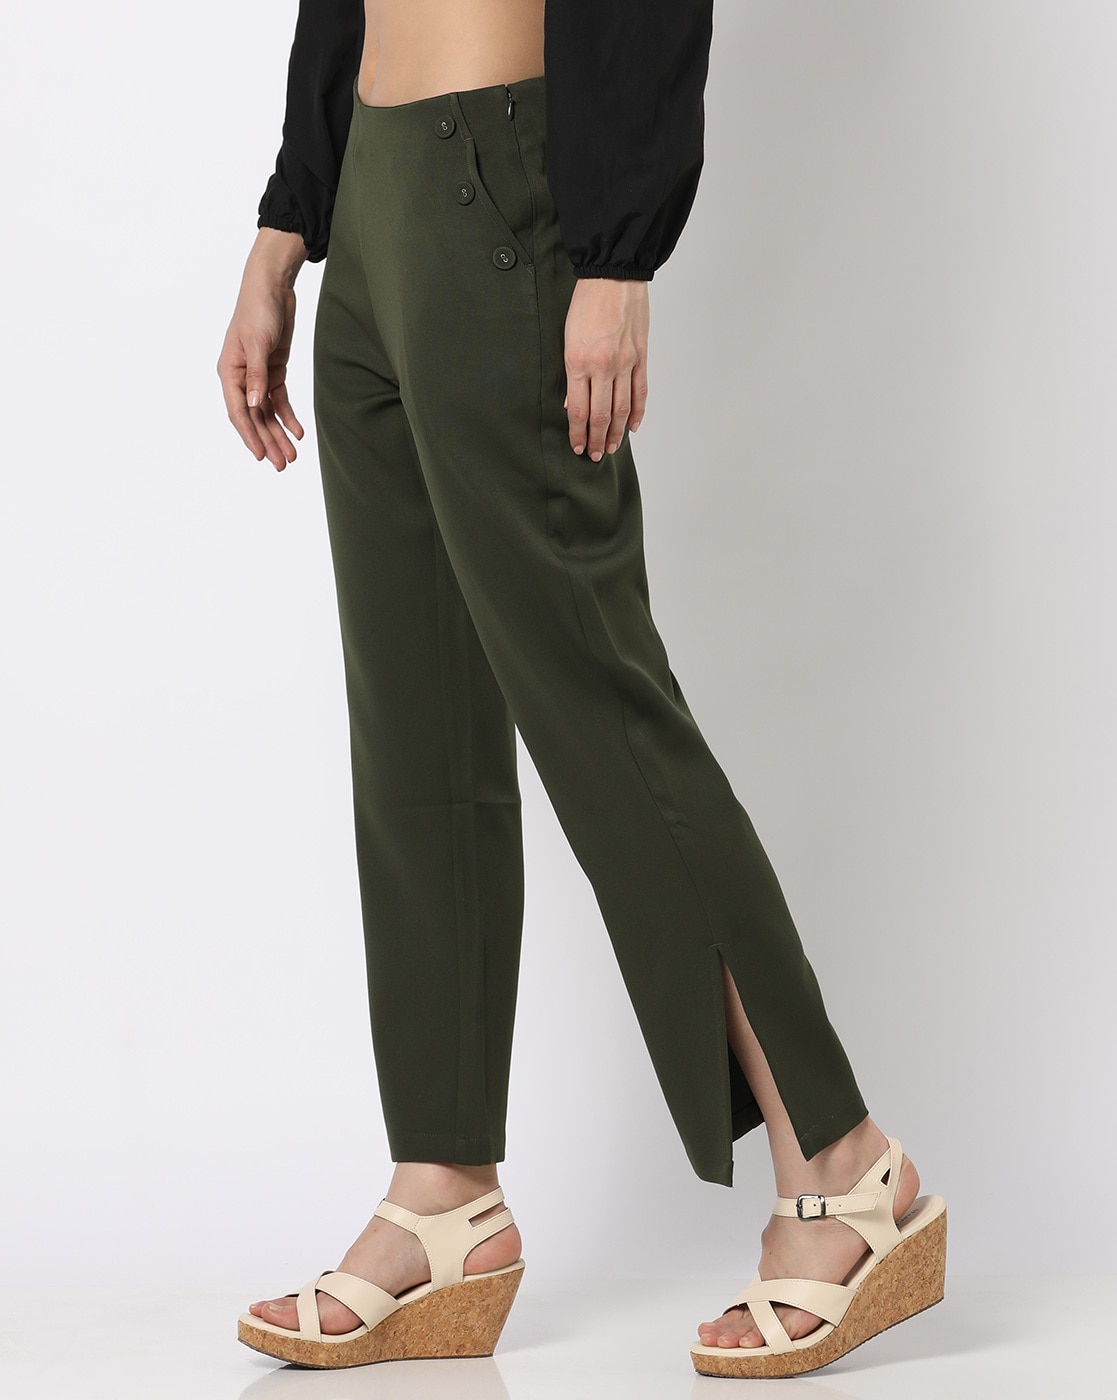 New and used Olive Green Women's Pants for sale | Facebook Marketplace